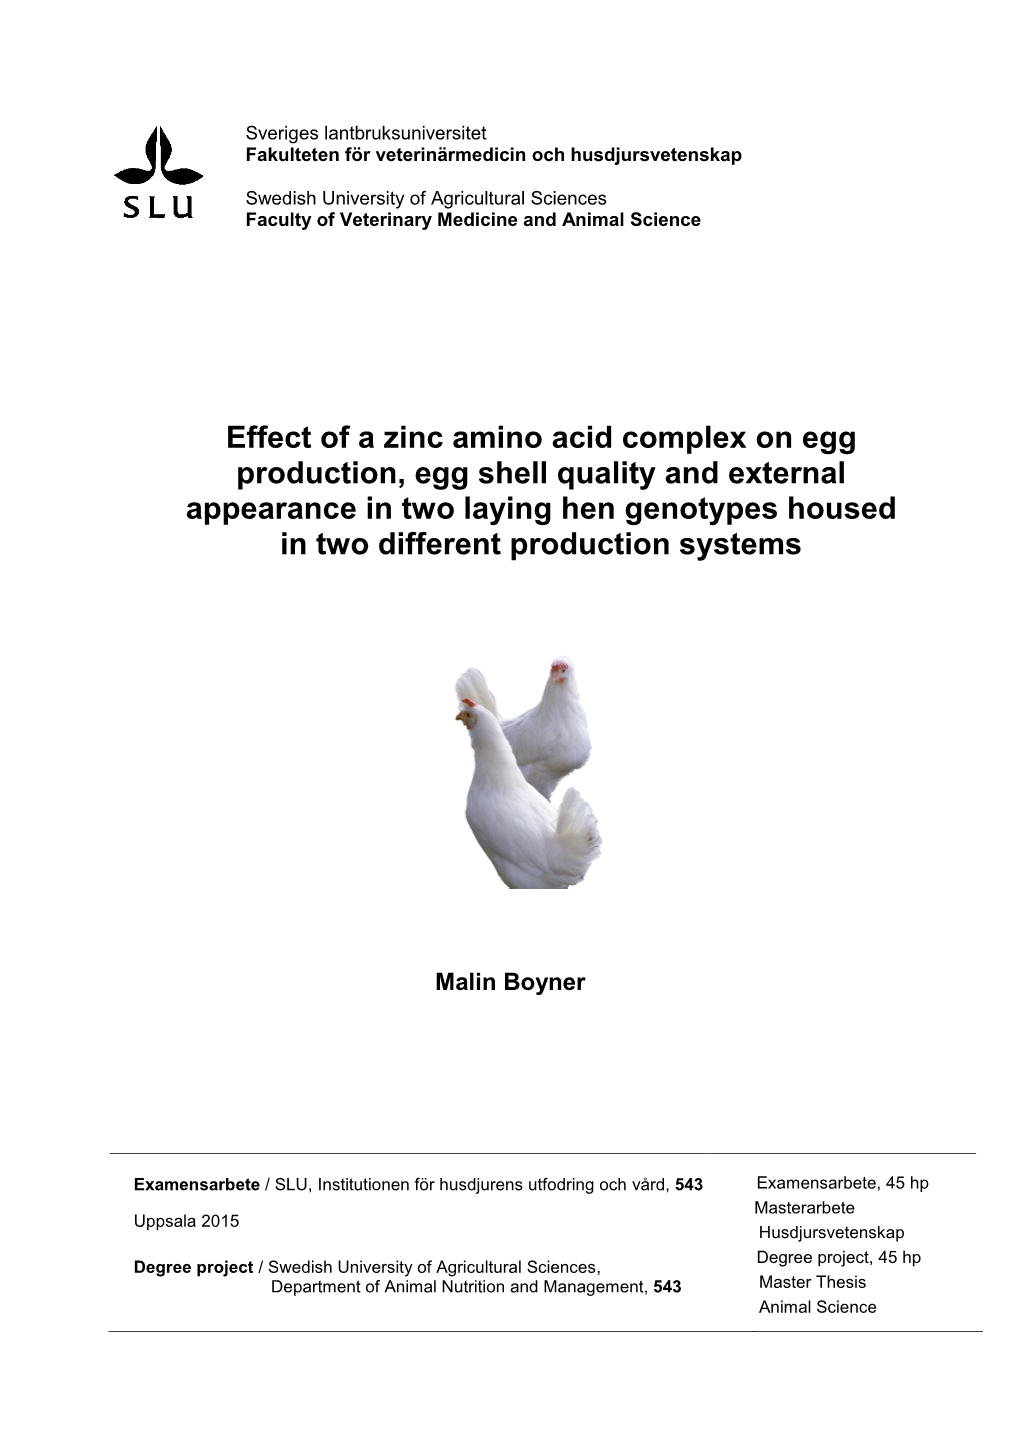 Effect of a Zinc Amino Acid Complex on Egg Production, Egg Shell Quality